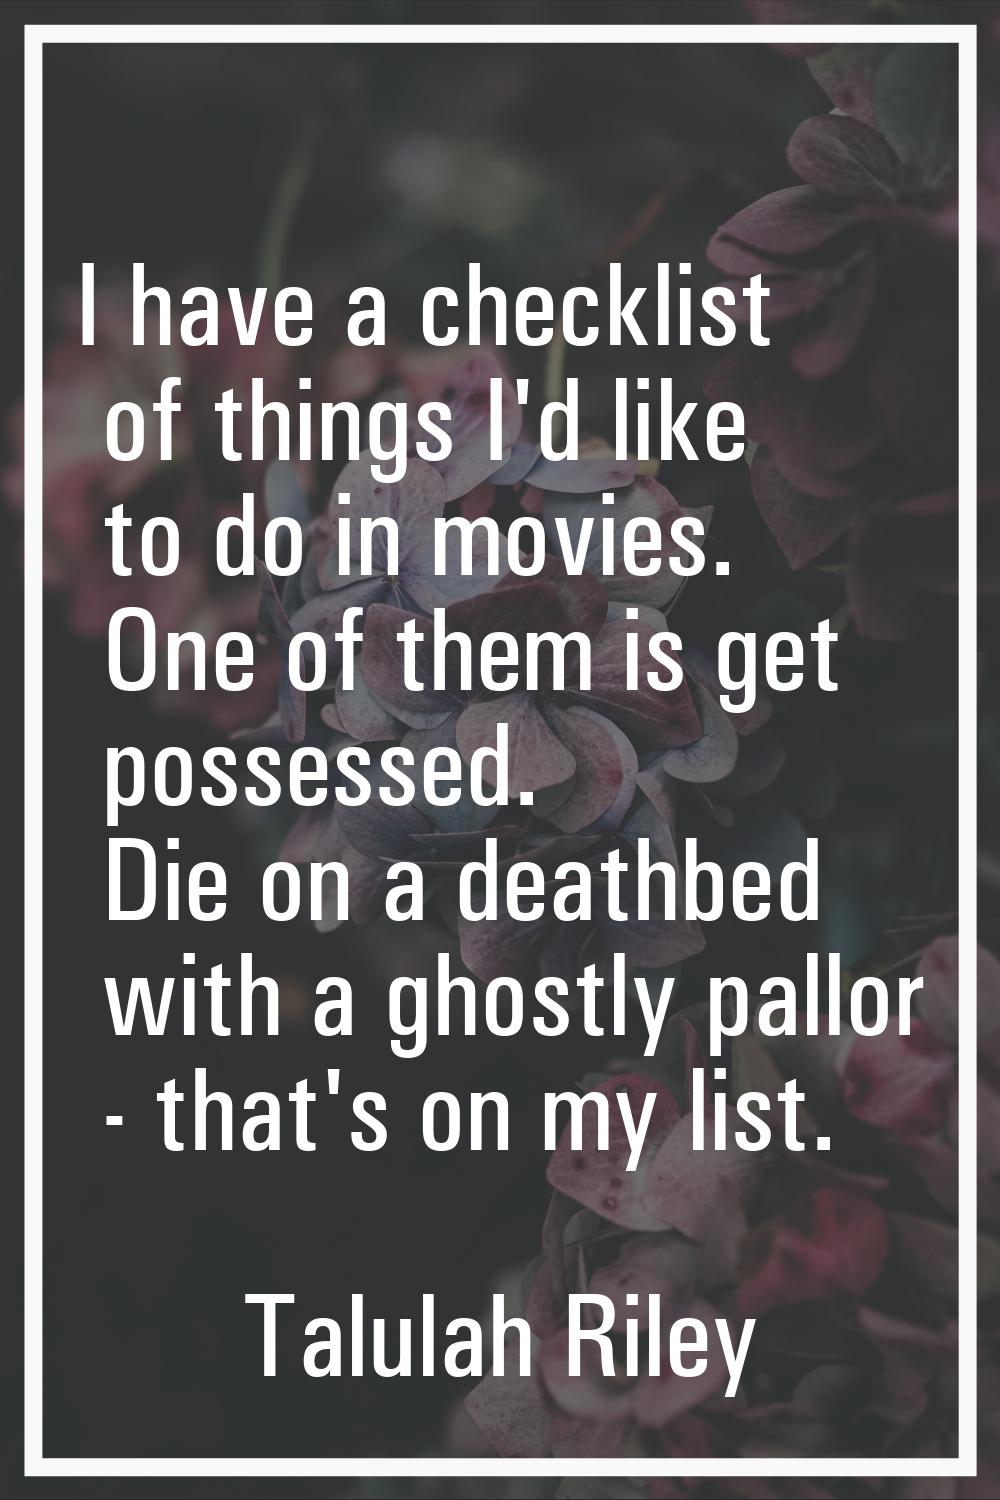 I have a checklist of things I'd like to do in movies. One of them is get possessed. Die on a death